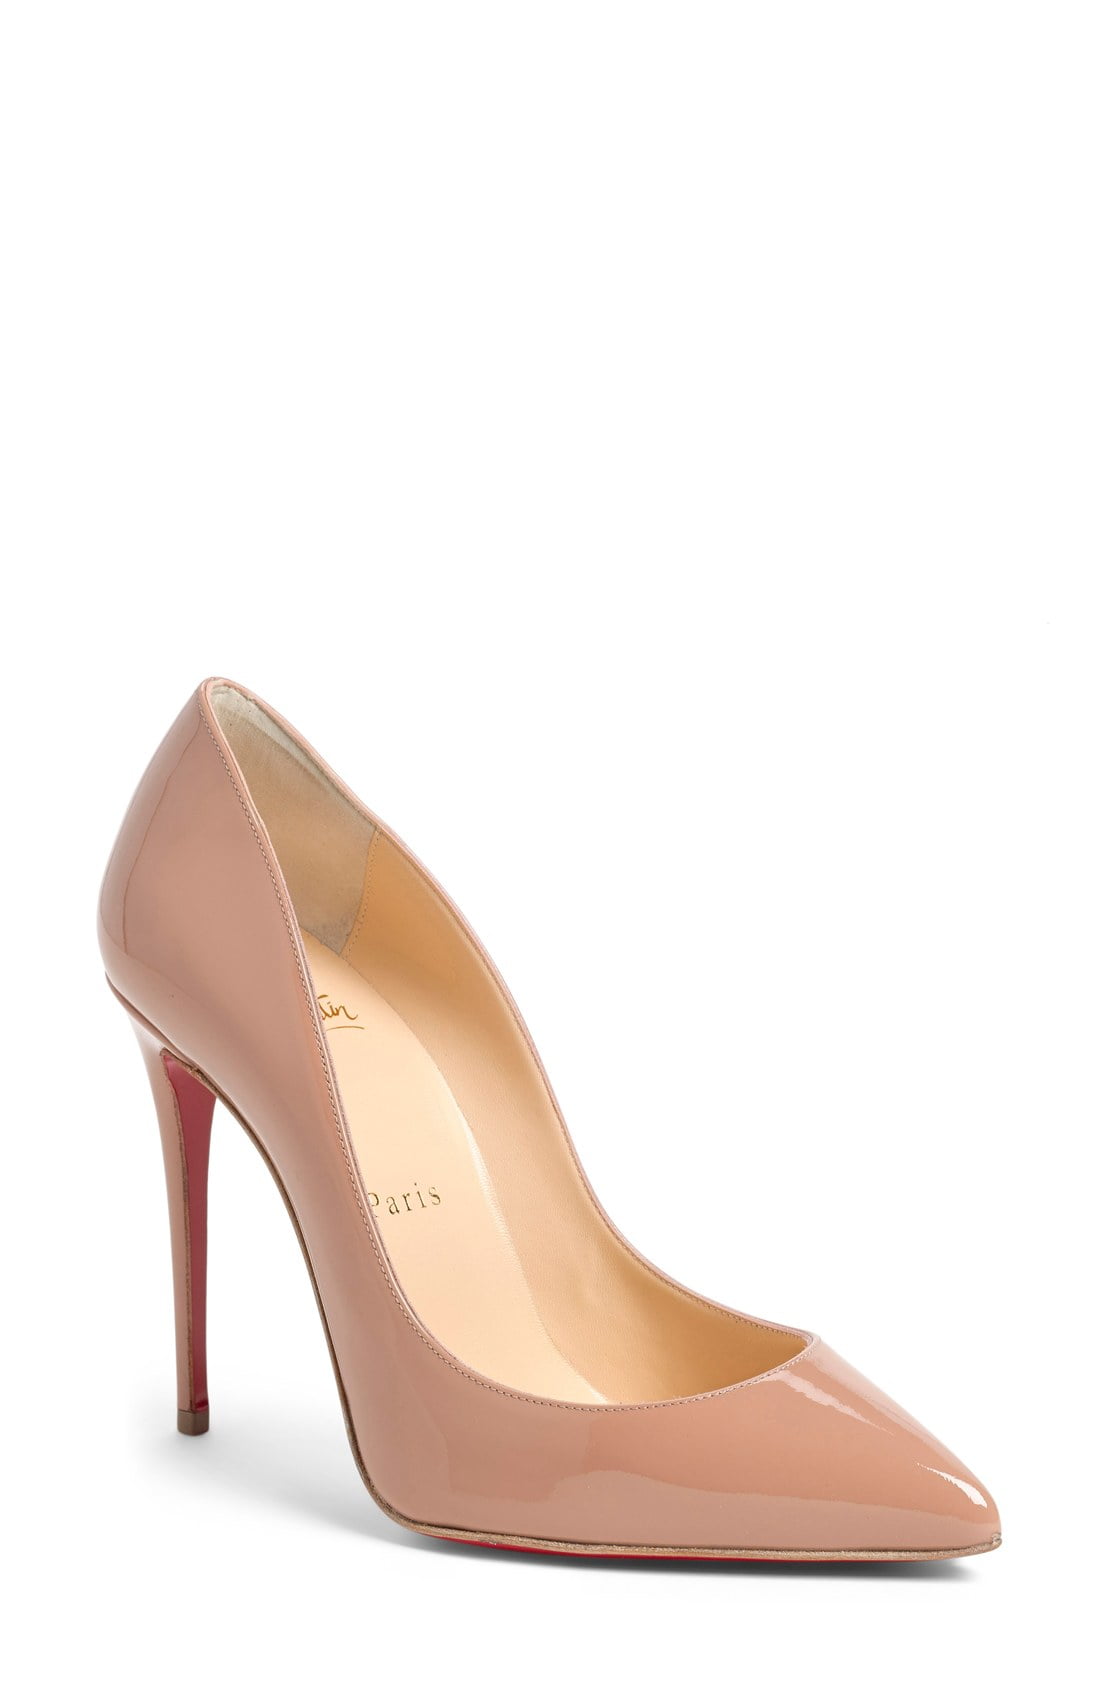 Women’s Christian Louboutin Pigalle Follies Pointed Toe Pump, Size 8 ...